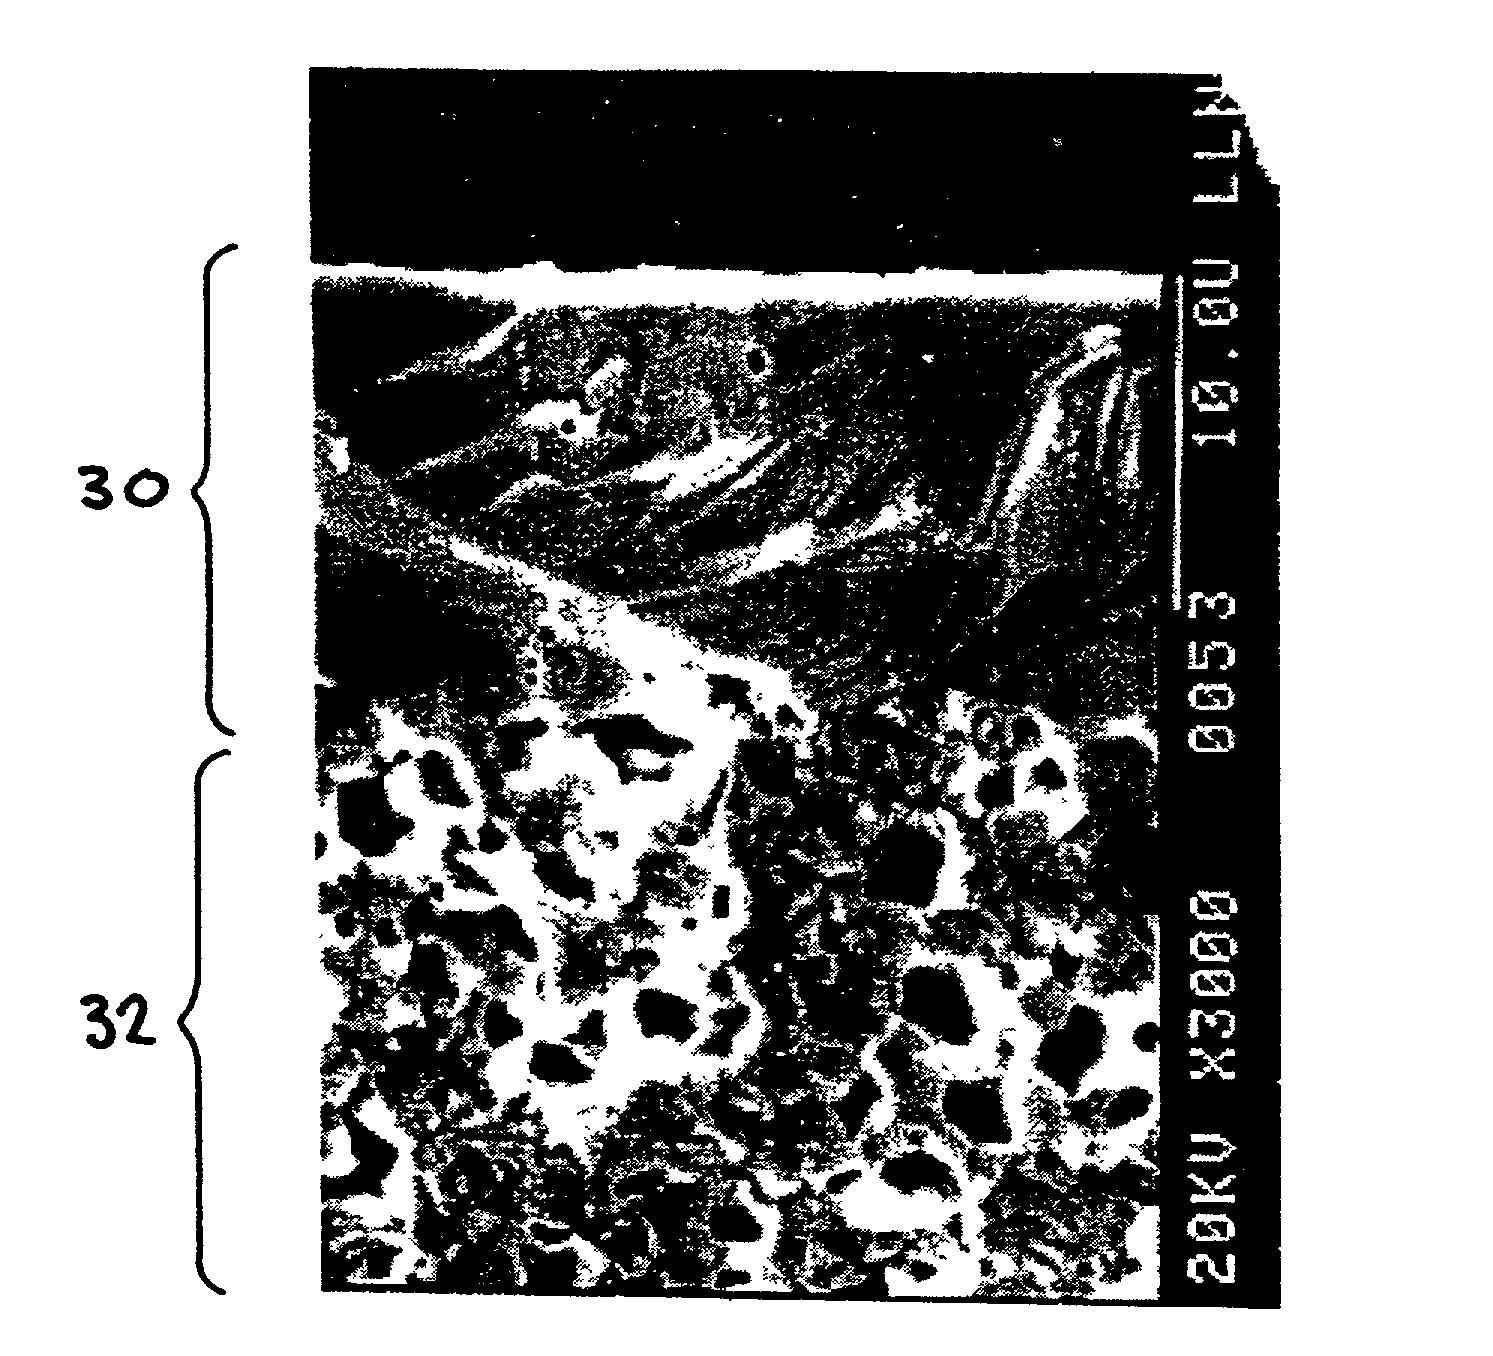 Colloidal spray method for low cost thin coating deposition